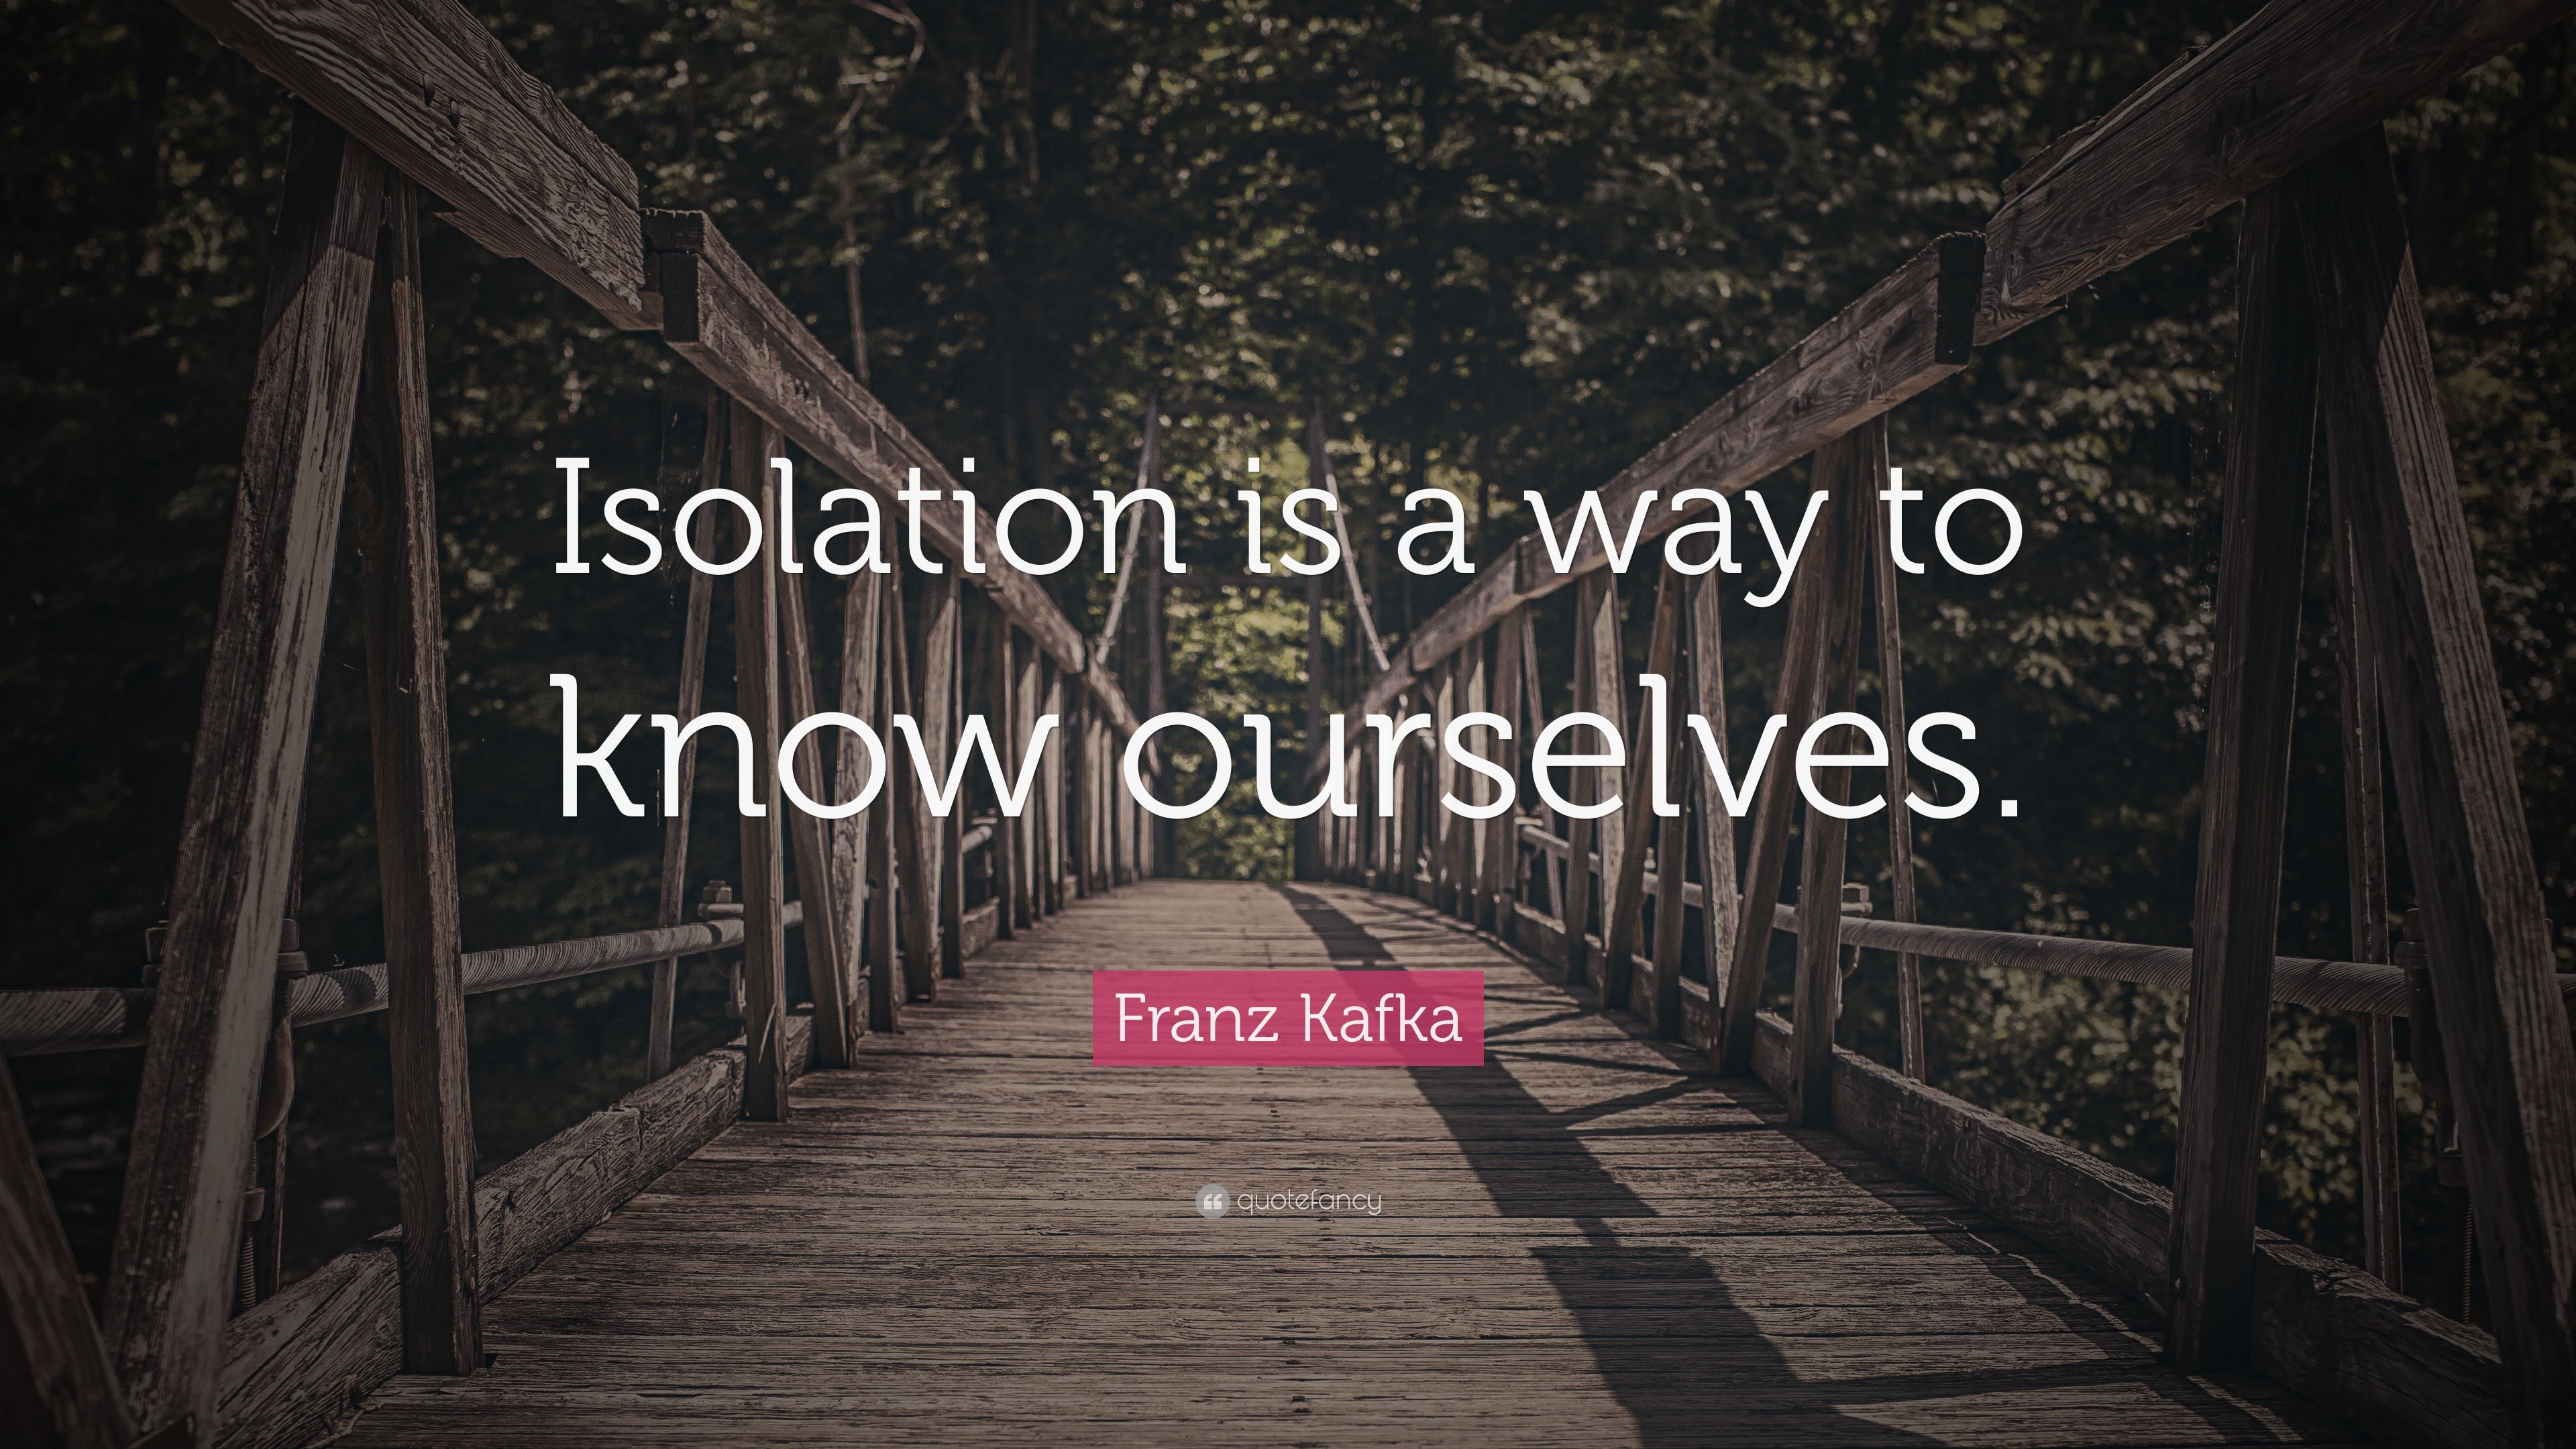 Franz Kafka Quote: “Isolation is a way to know ourselves.” 12